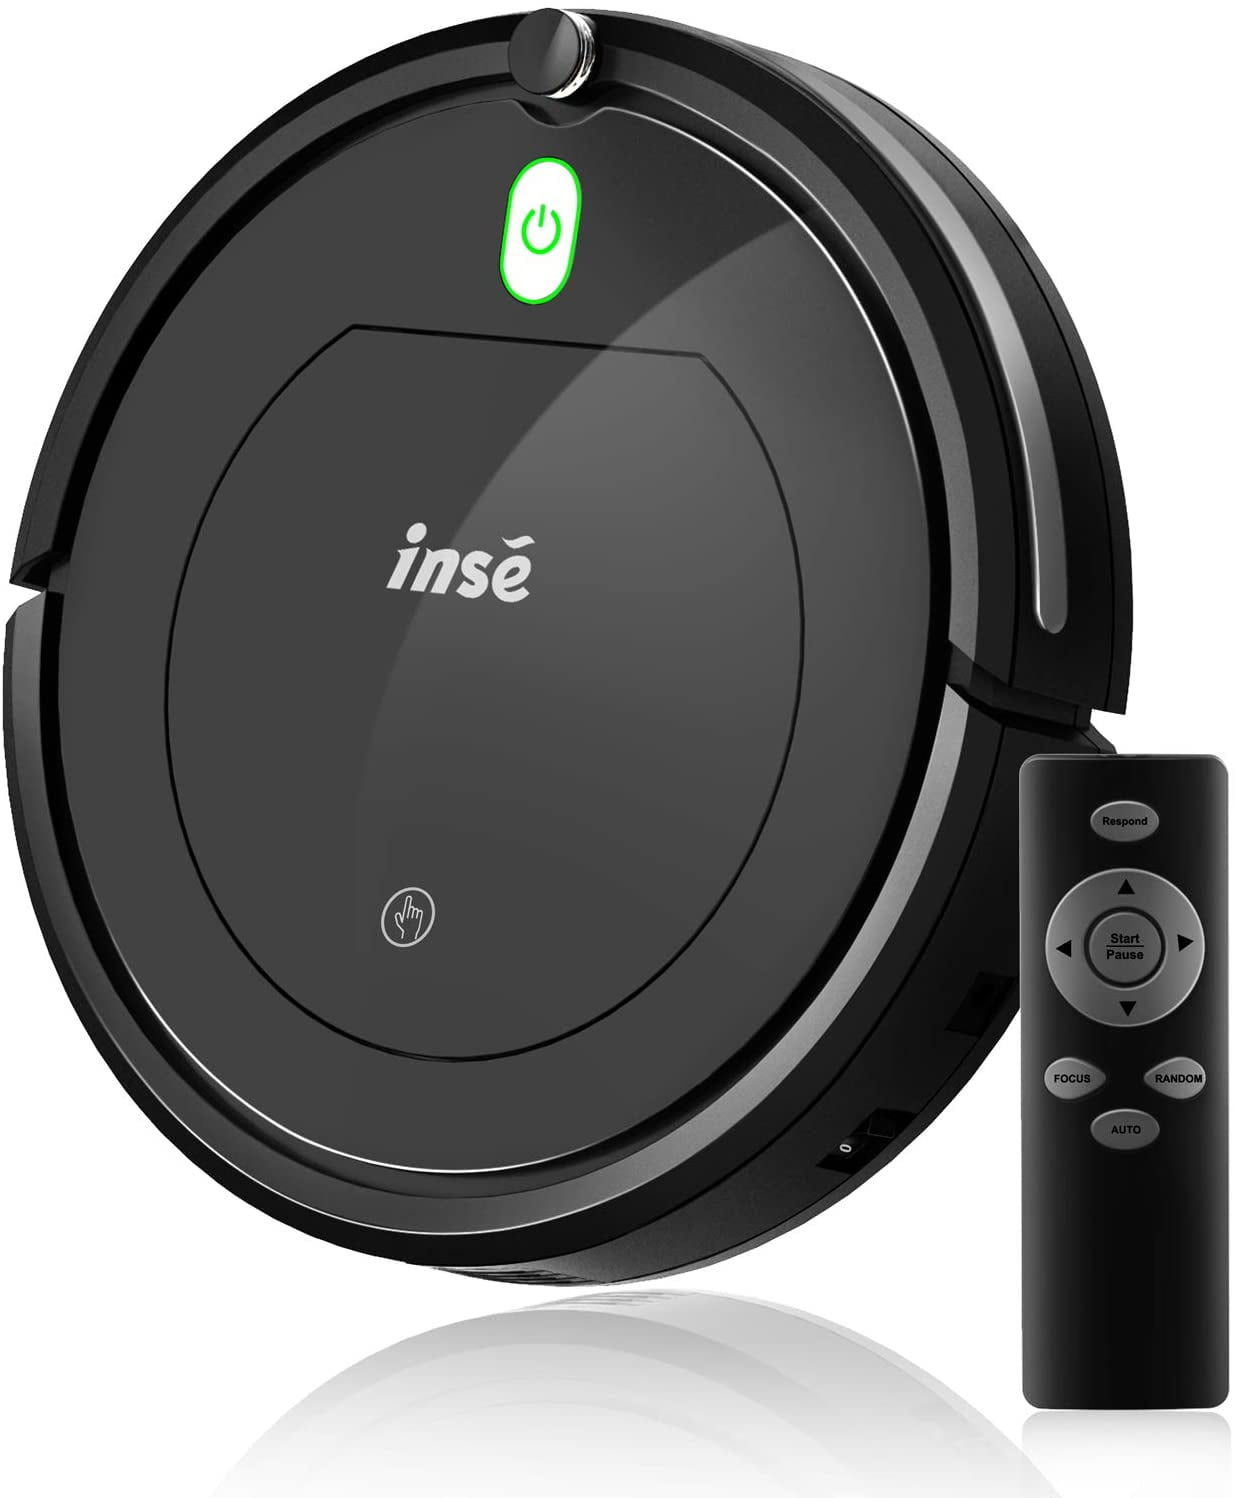 Where to buy the Inse Robot Vacuum Cleaner 2000Pa?